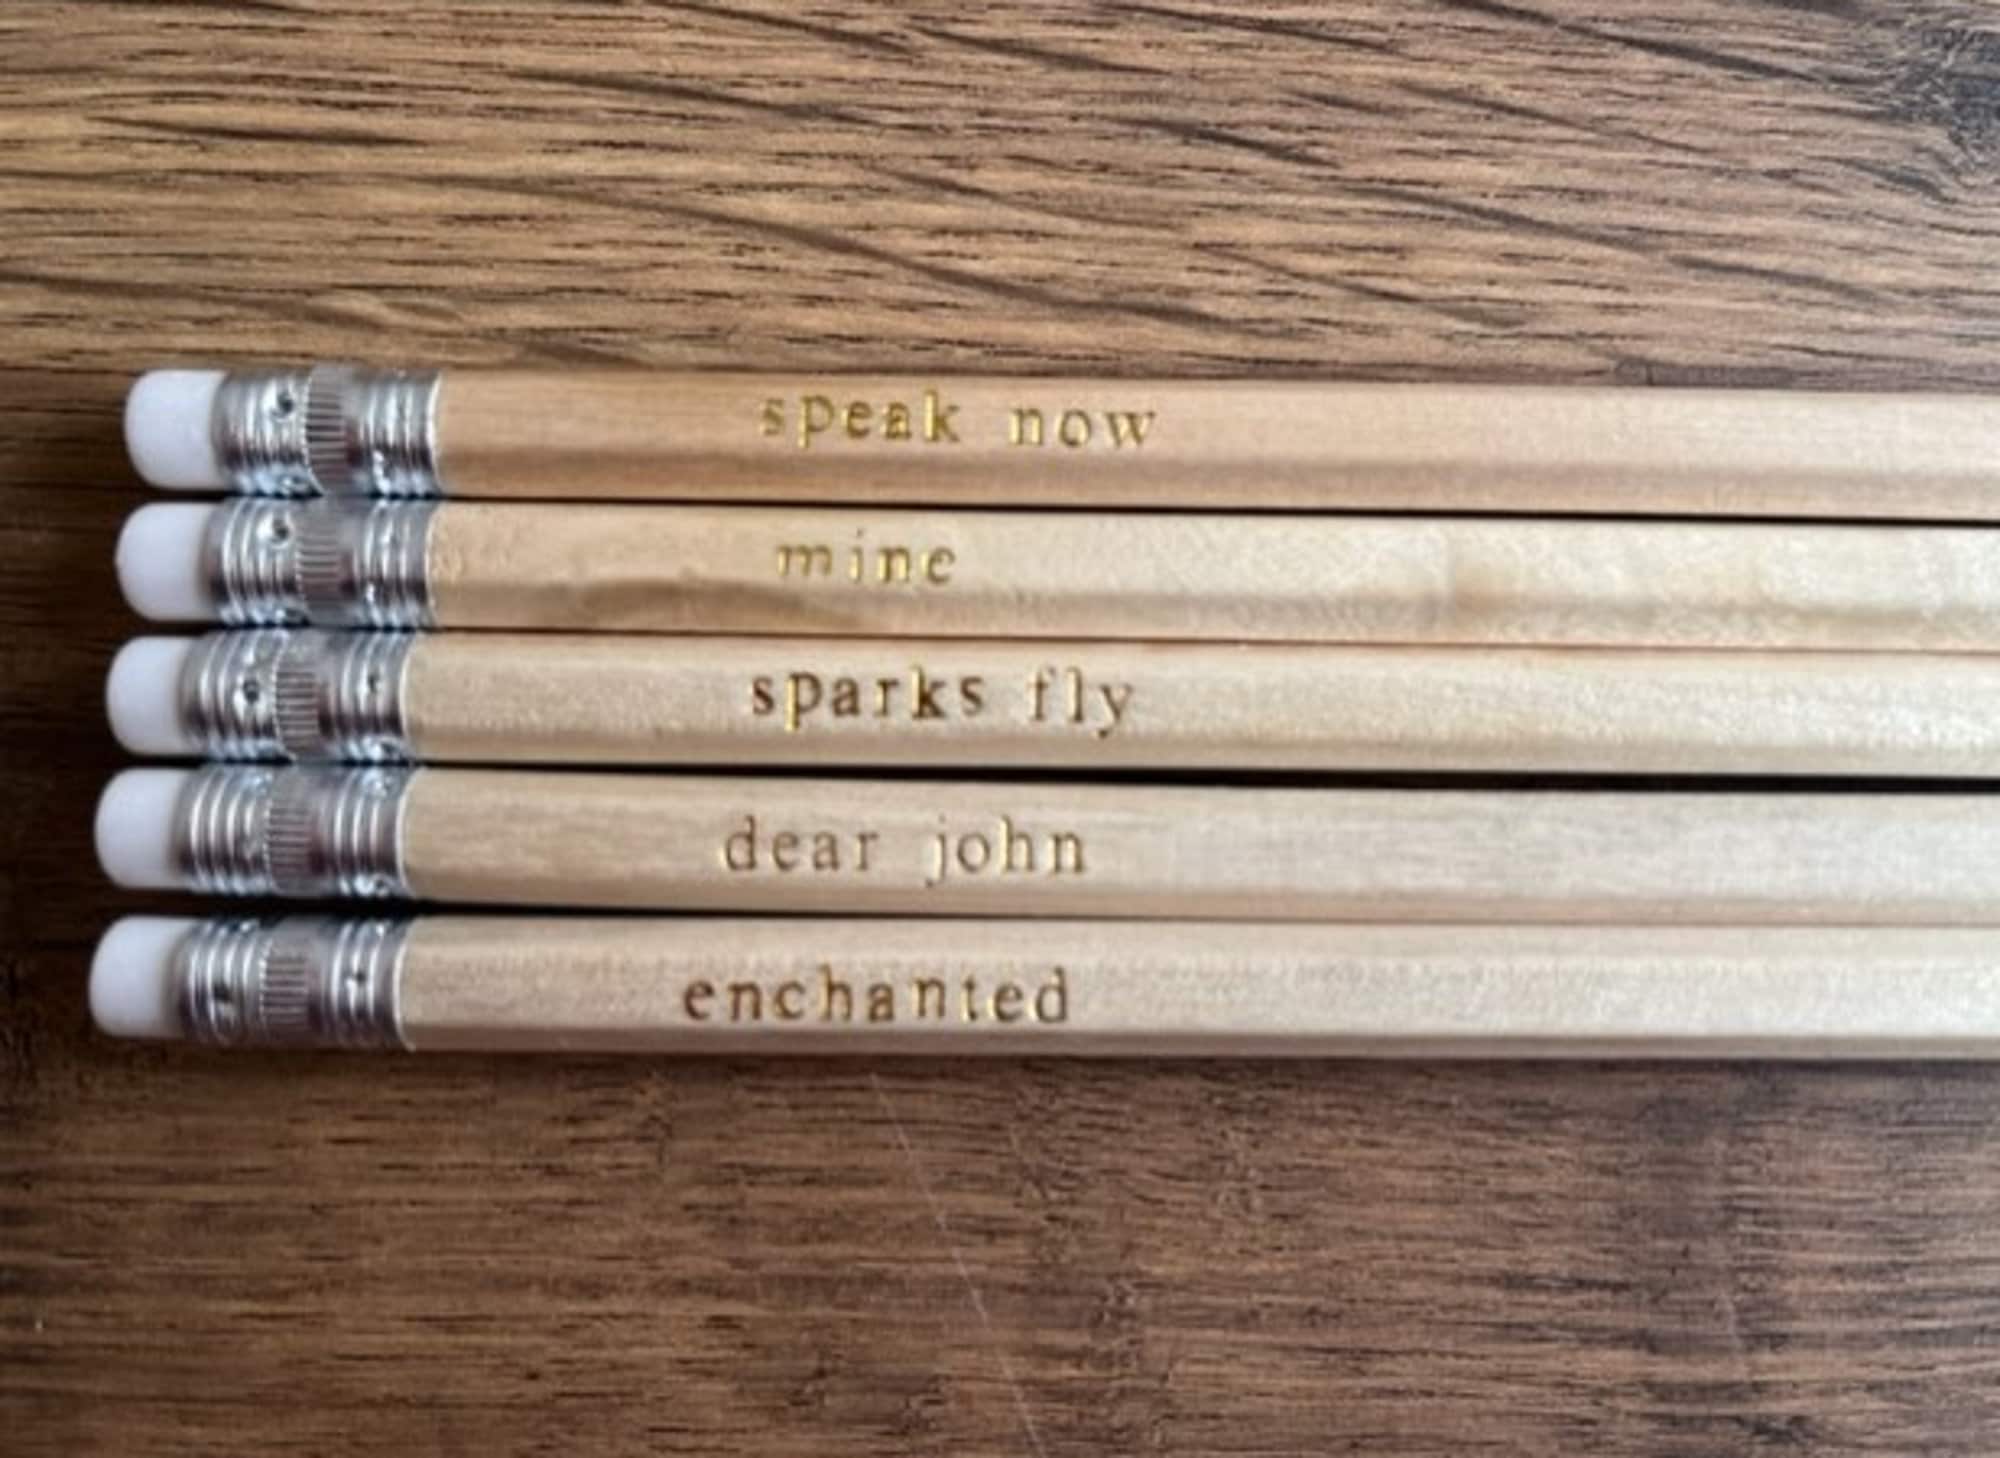 Taylor Swift Pencils - Customised Pencils Featuring Speak Now Song Titles